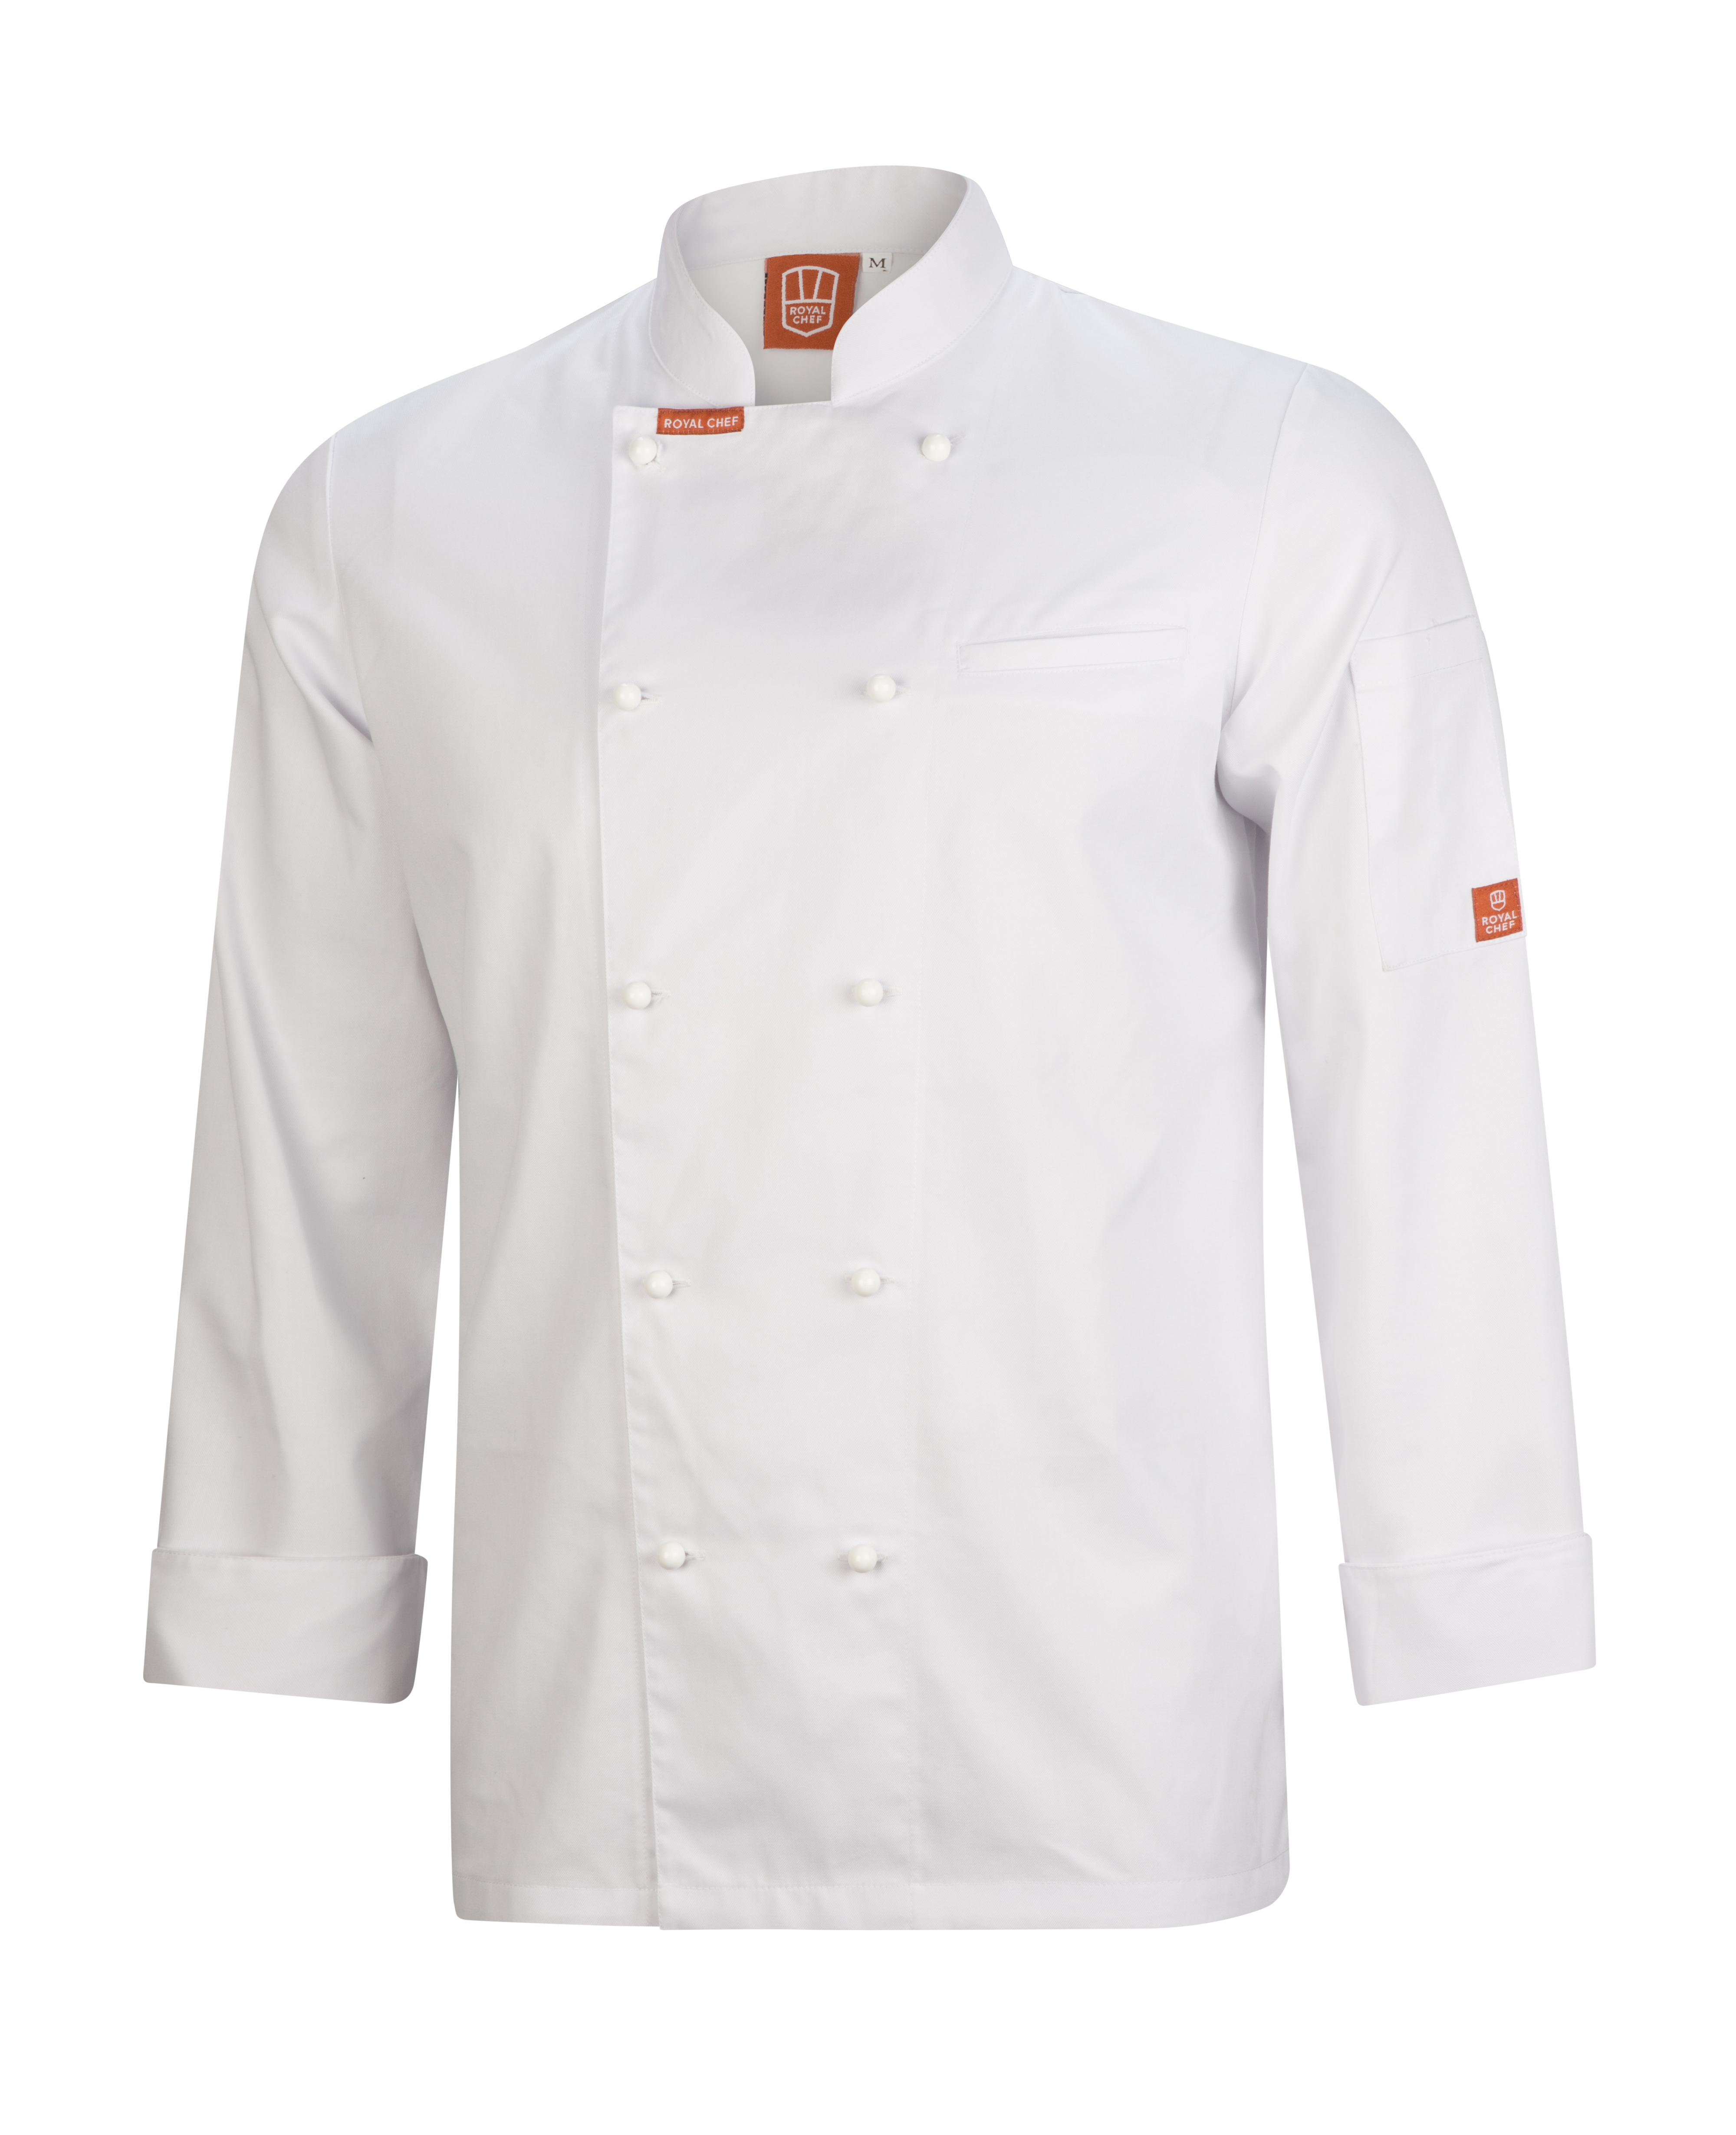 30% off on all our Chef uniforms!